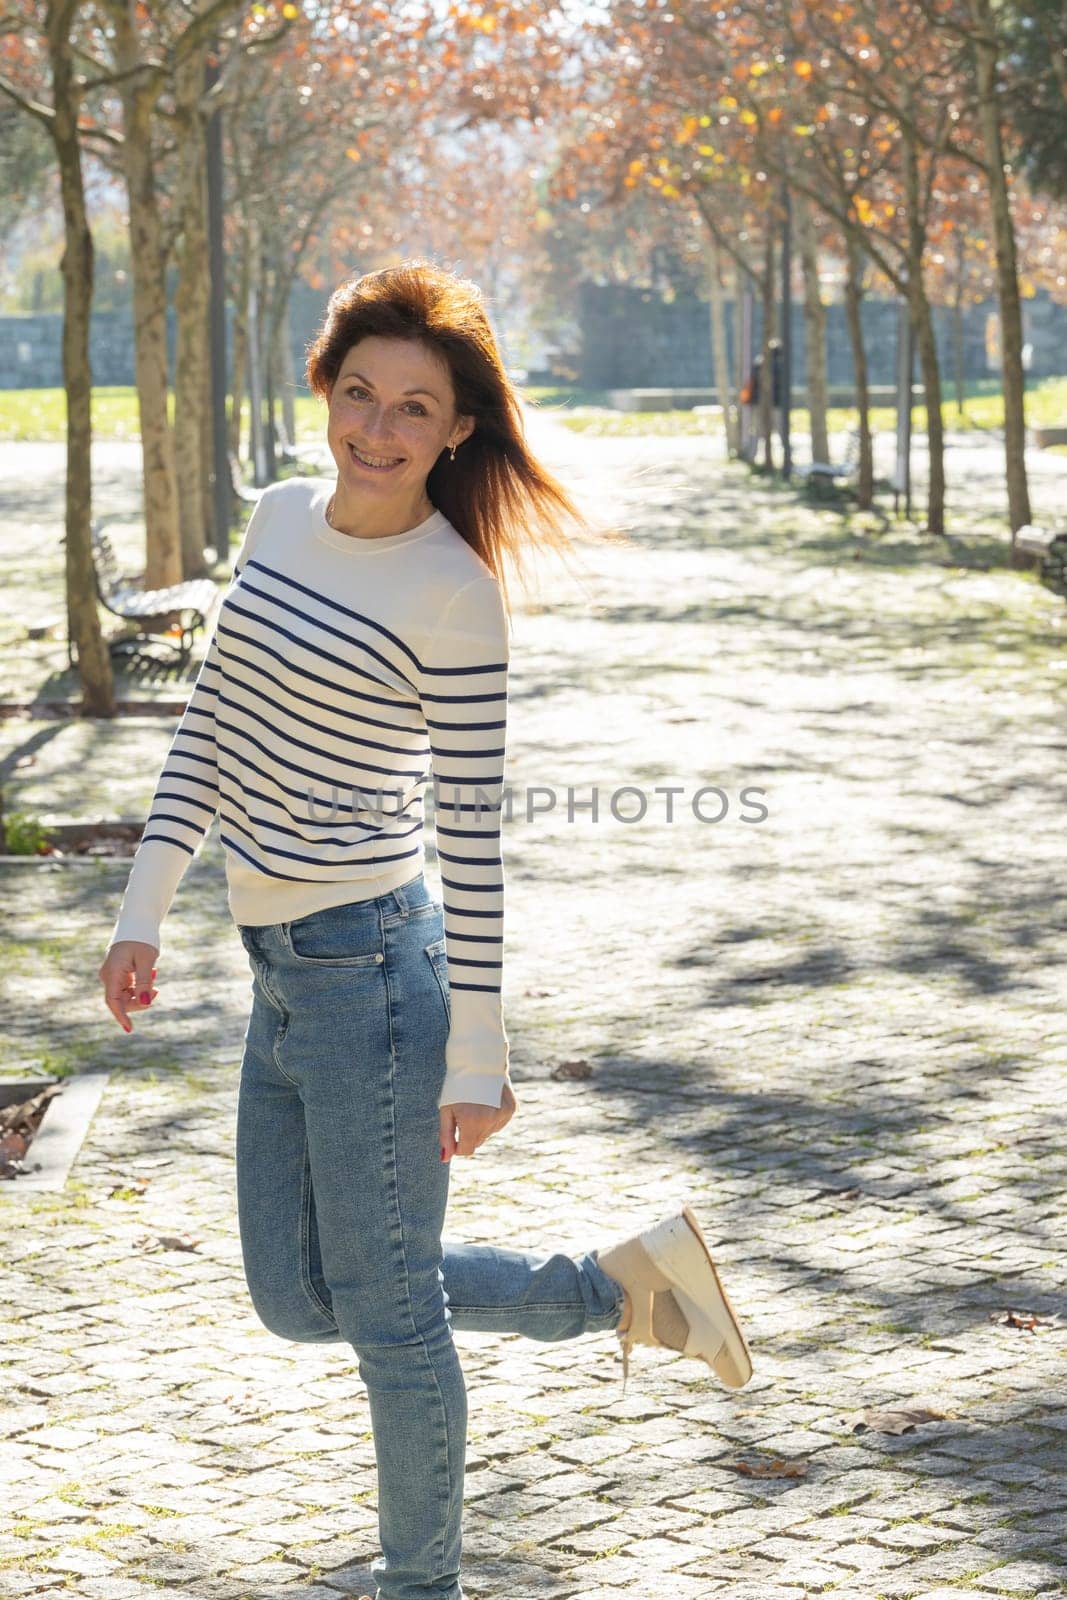 A woman in a striped sweater and blue jeans poses for a picture in a park. She is smiling and she is enjoying herself